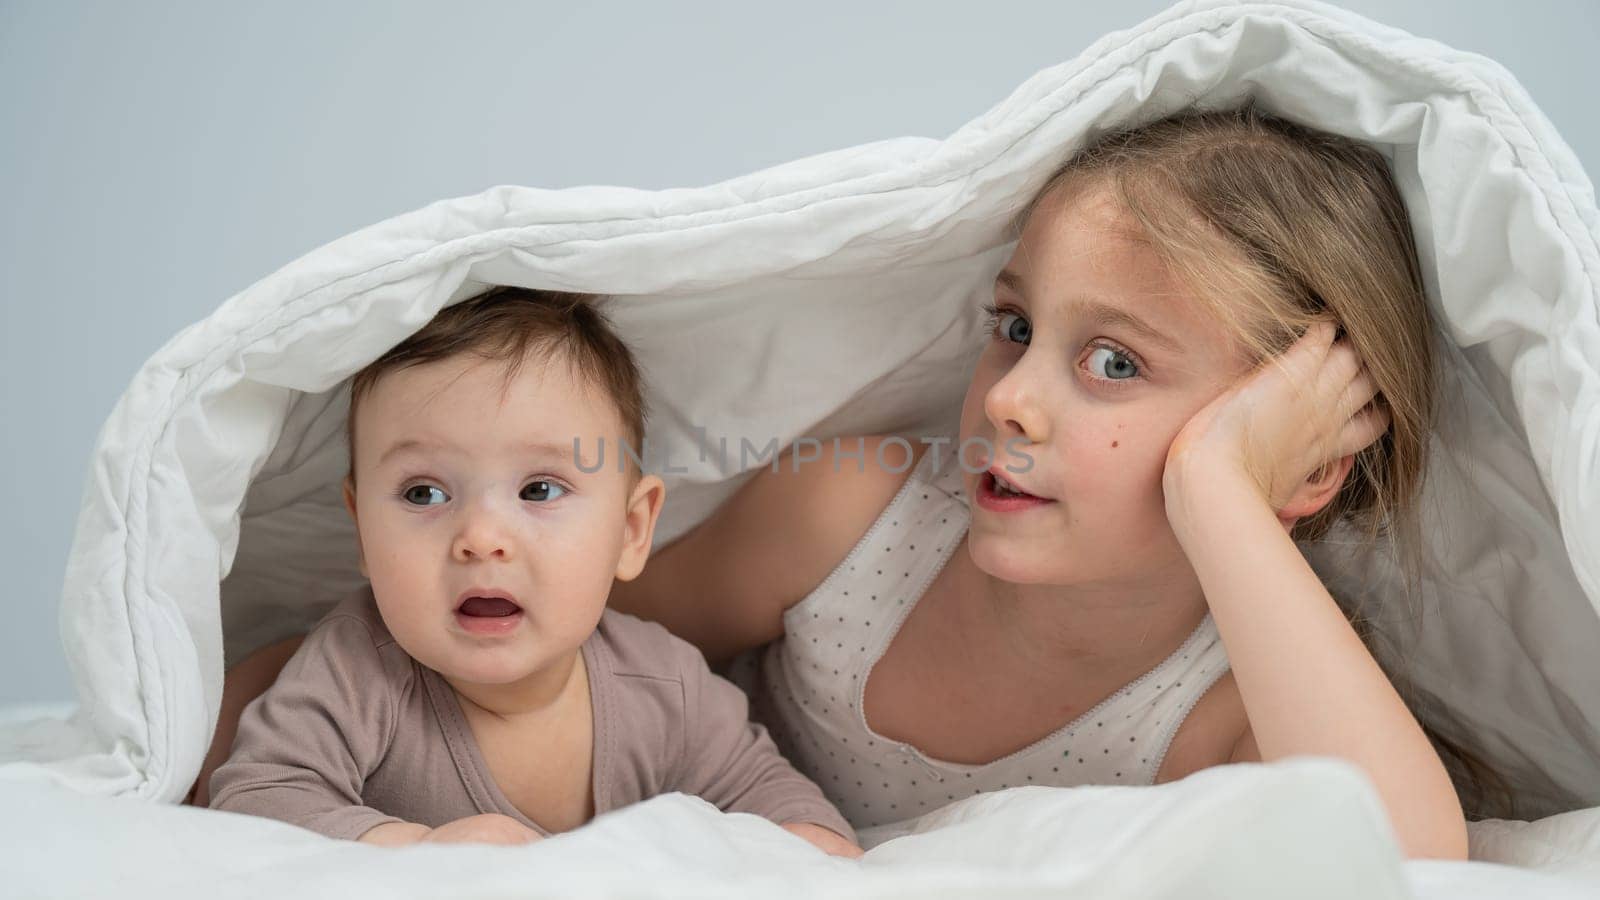 Little girl and her newborn brother hiding under the blanket. by mrwed54